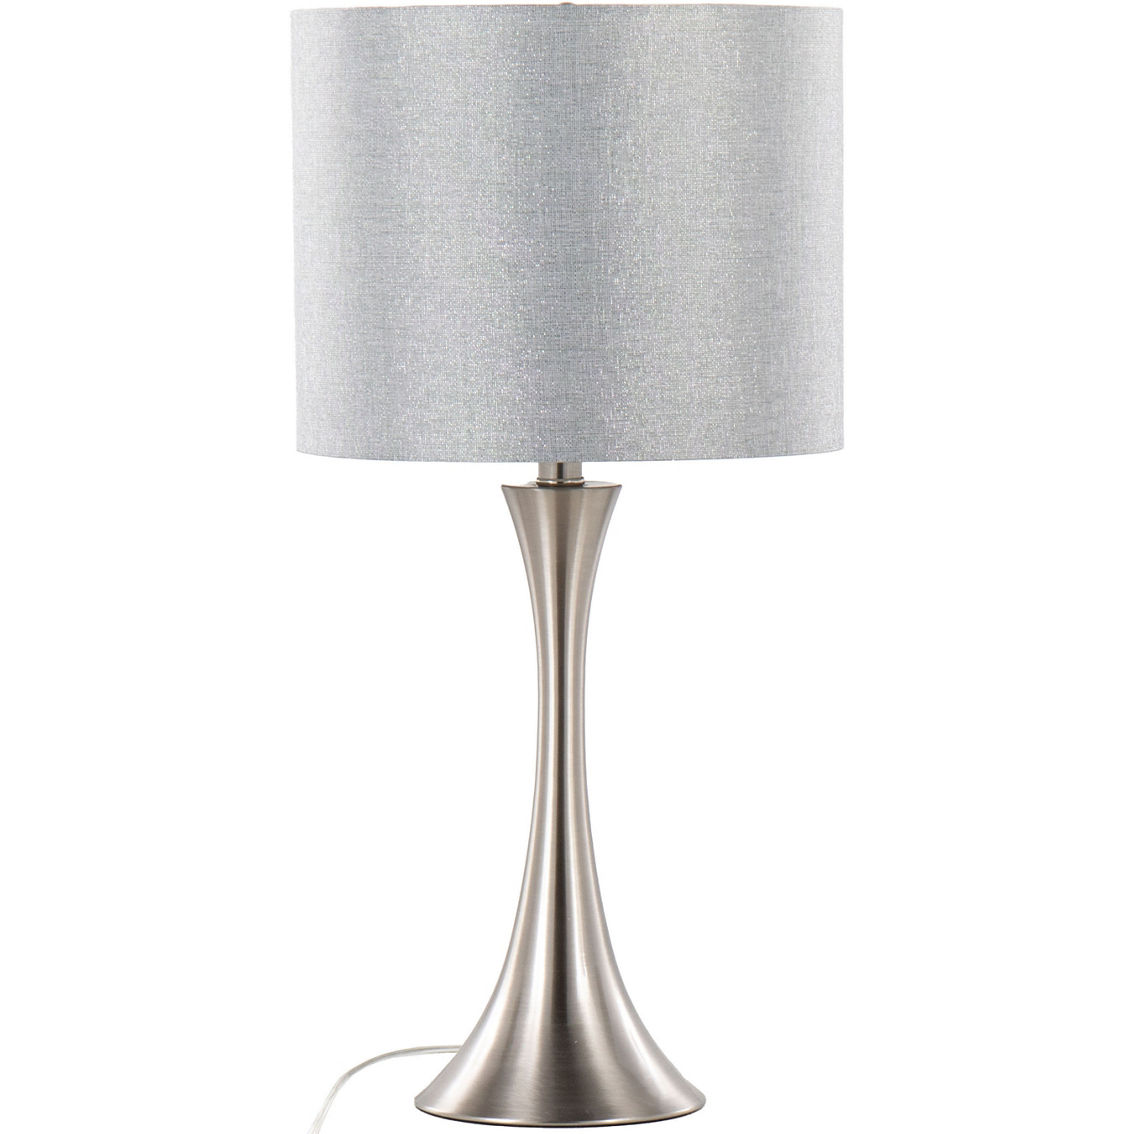 LumiSource Lenuxe 24.25 in. Metal Table Lamp 2 pk. - Image 3 of 9